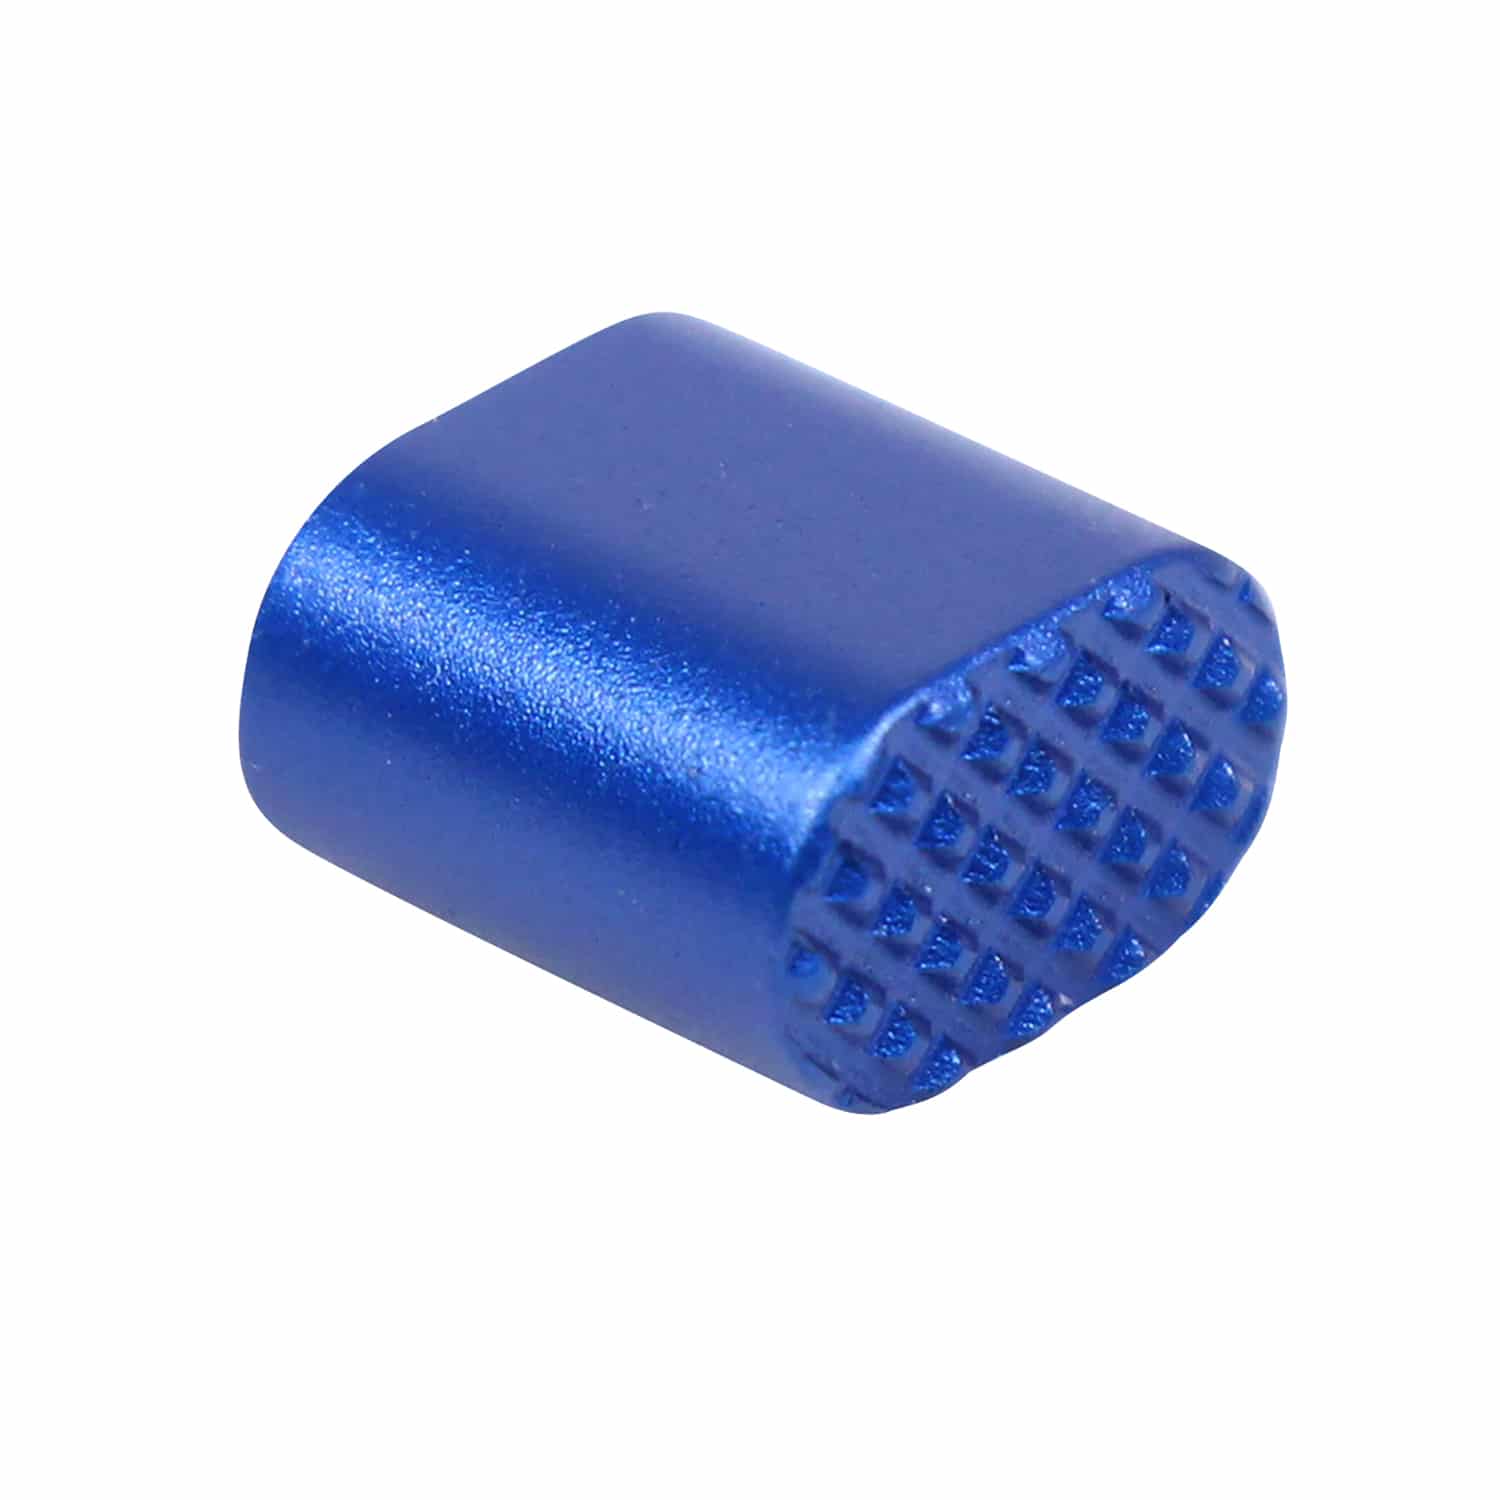 AR-15 Extended Magazine Release Button in Anodized Blue